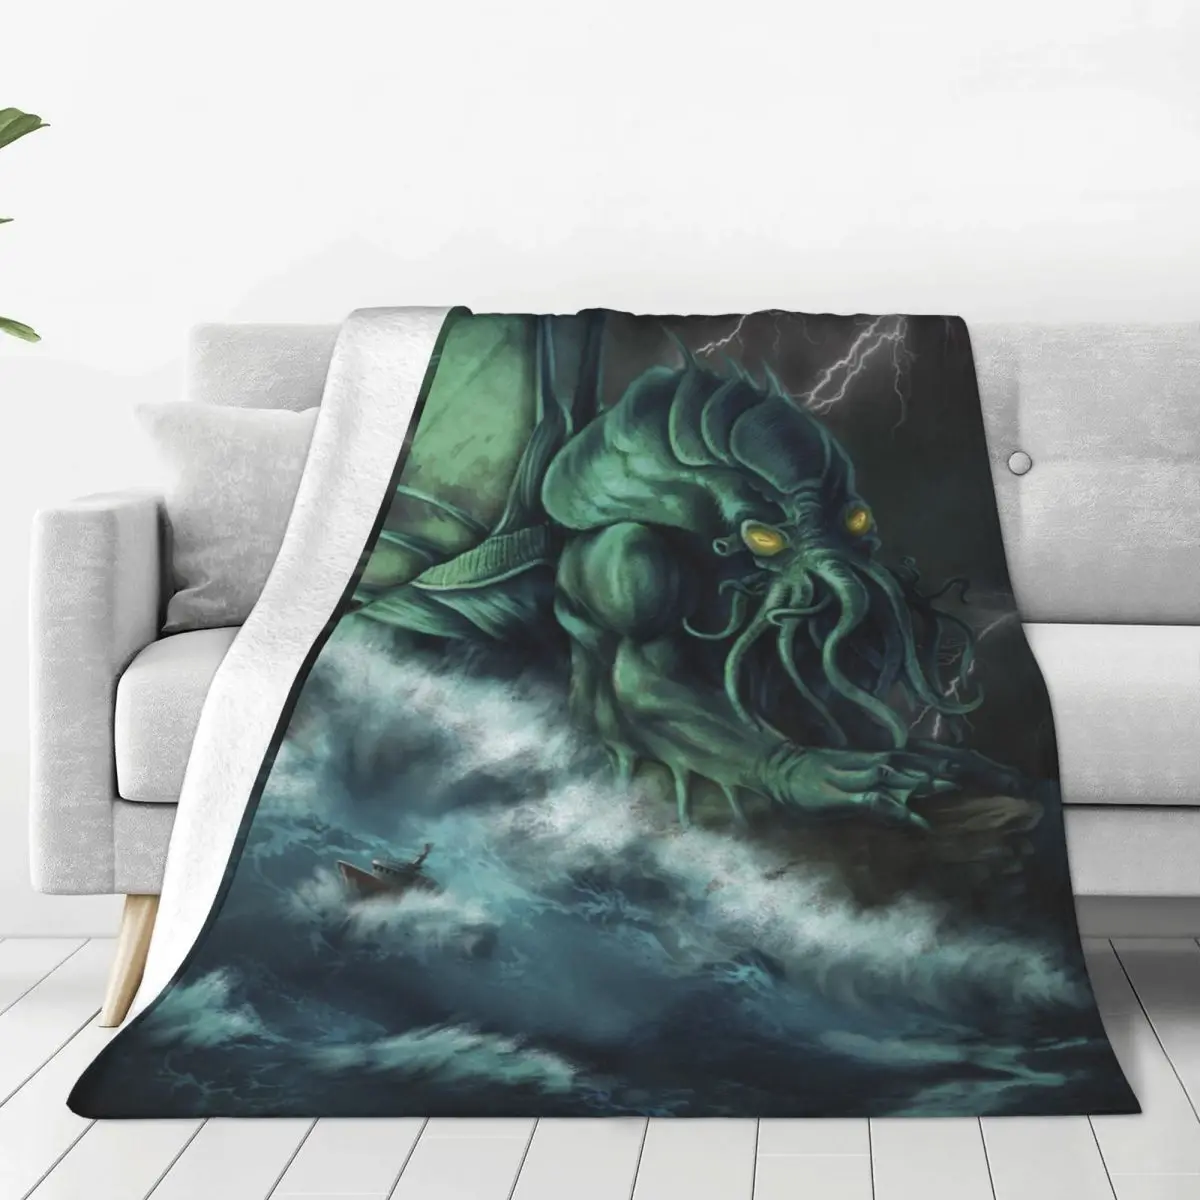 

Calling Cthulhu Octopus Fleece Throw Blanket Old Newspaper Mysticism Blanket for Sofa Office Ultra-Soft Bed Rug